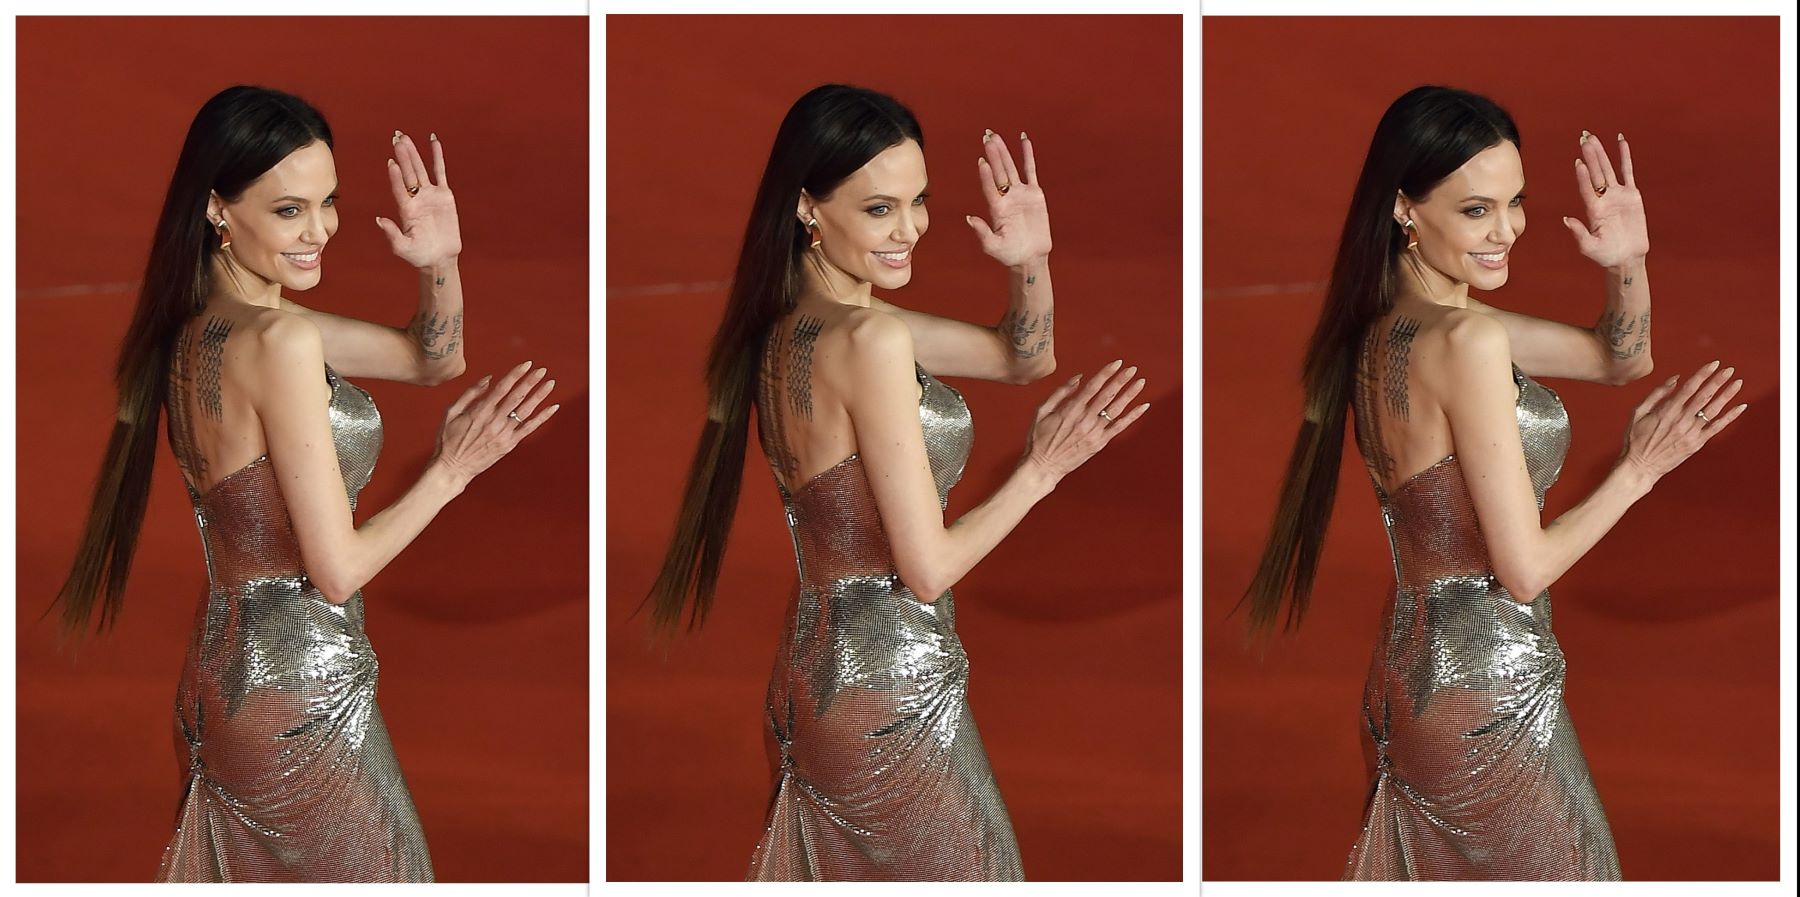 Angelina Jolie's hair extension disaster—what went wrong?